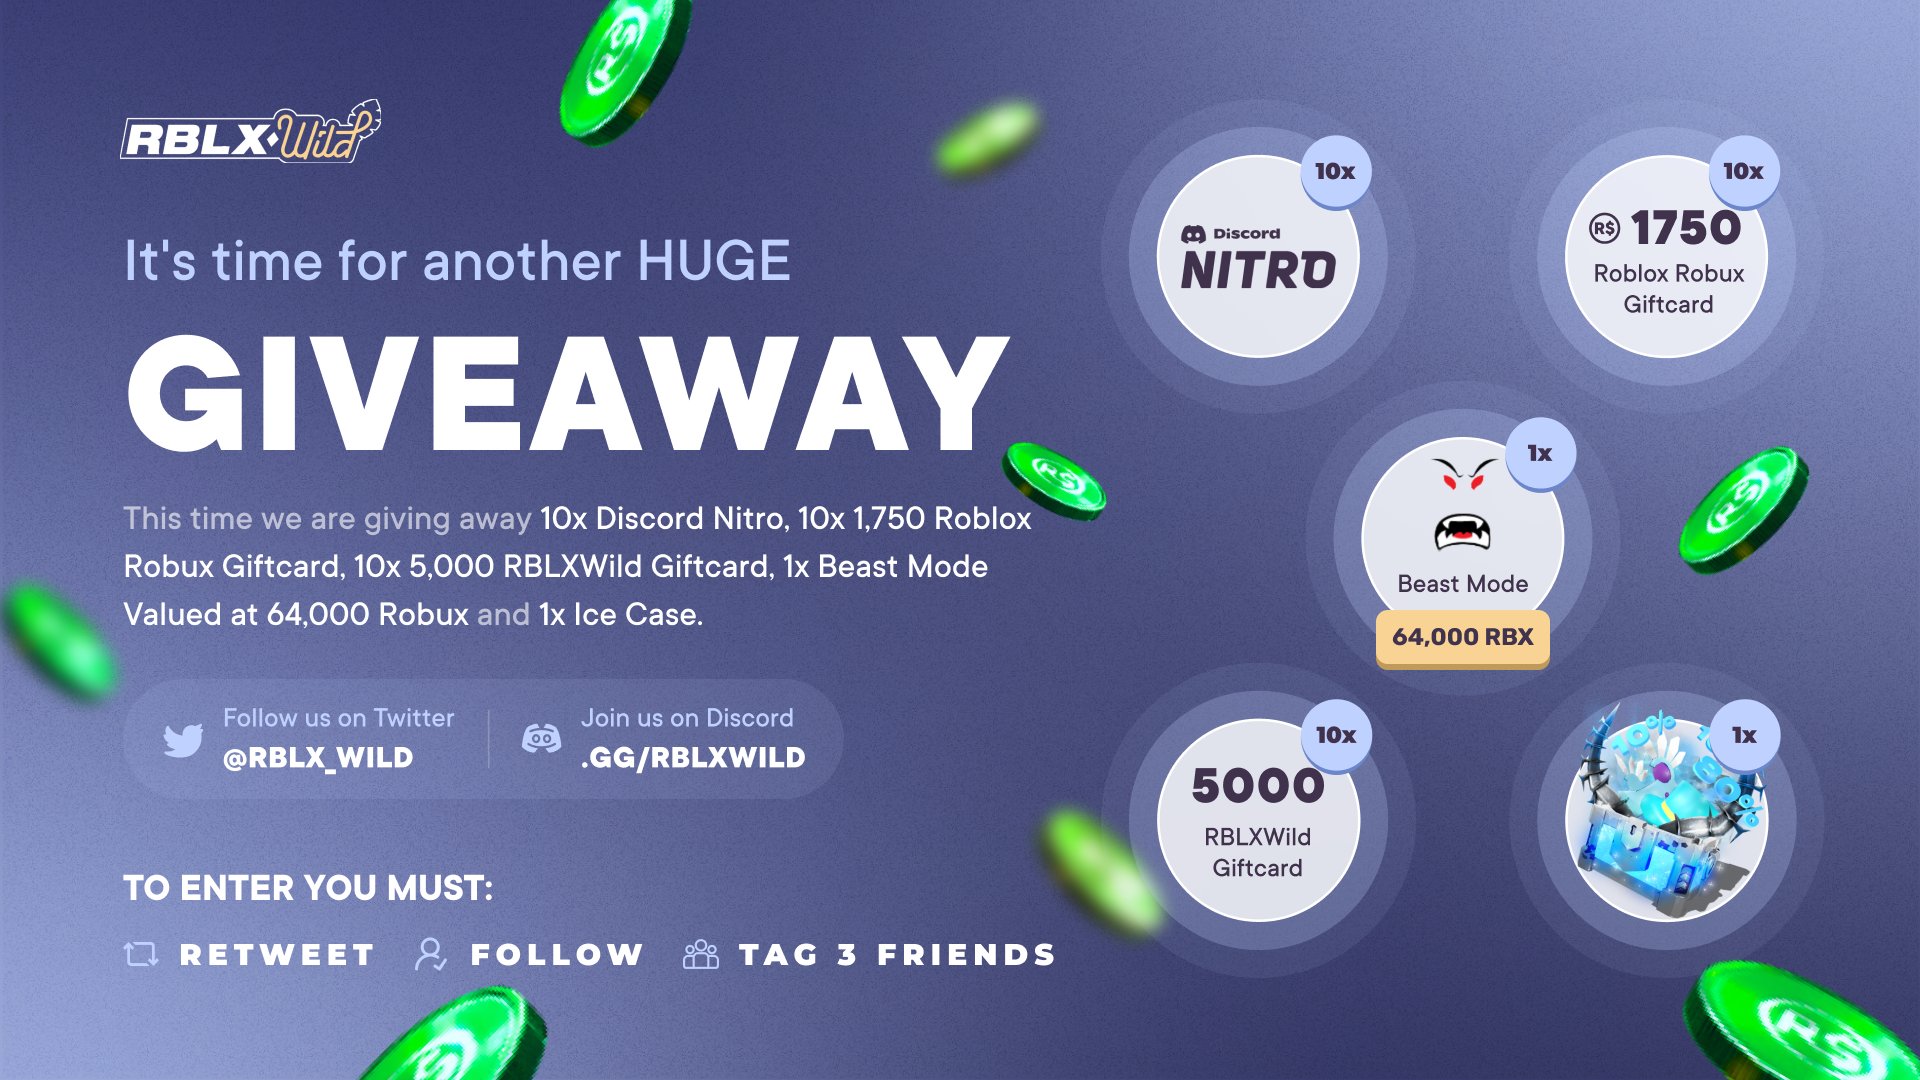 RBLXWild on X: Its time for another huge Giveaway💰 1⃣To enter 2⃣Retweet  3⃣Follow 4⃣Tag 3 Friends 🥇10x 5000 RBLXWild Giftcards 🥈10X 1700 Roblox  Robux Giftcard 🥉 10x Discord Nitro There will be